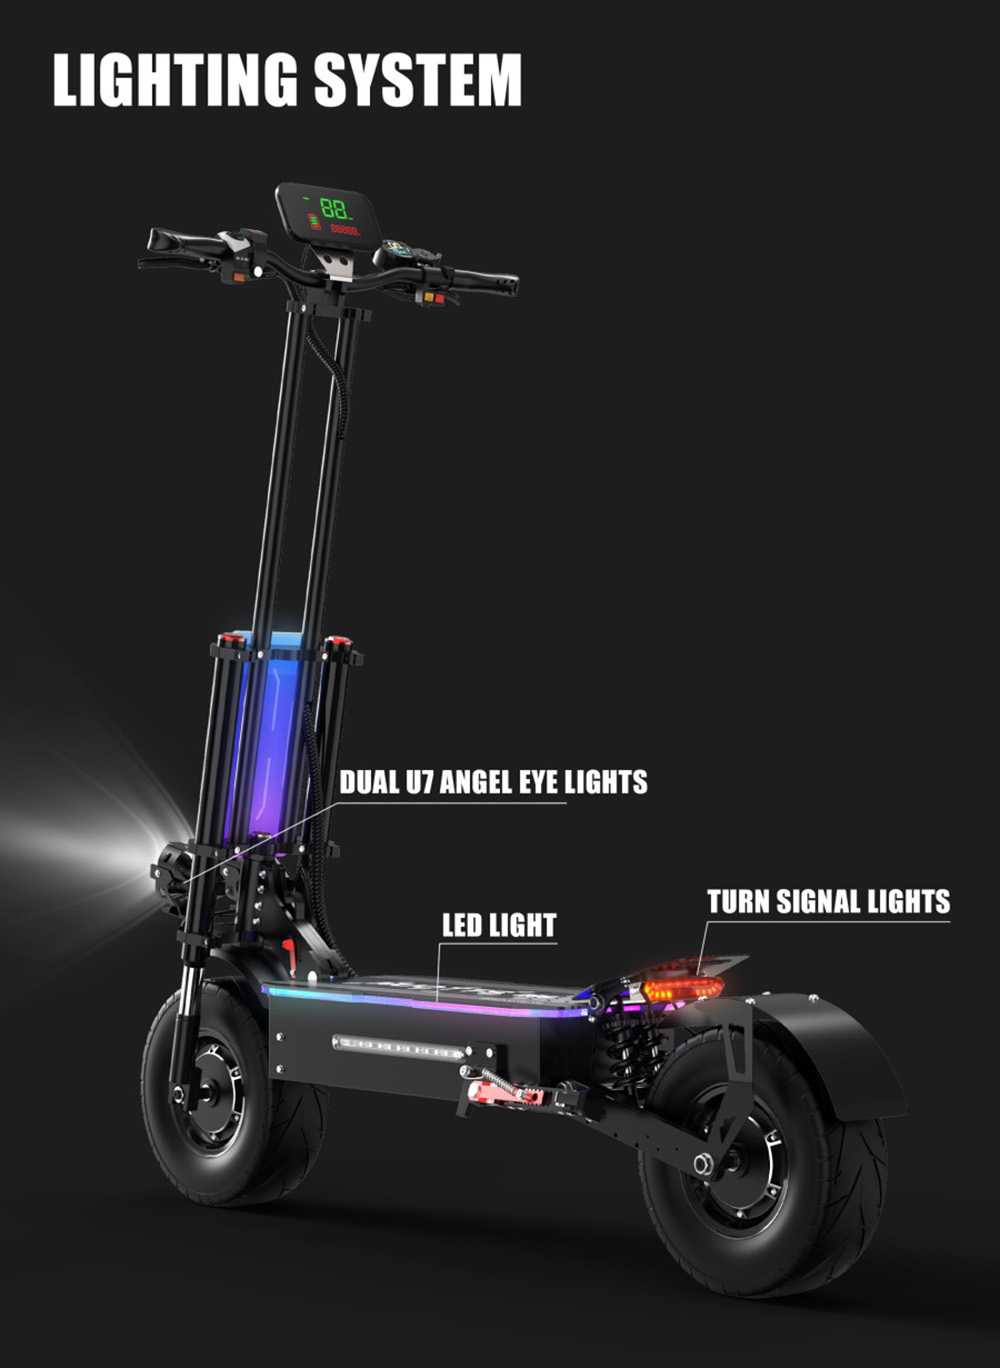 DUOTTS D99 13 inch electric scooter 60V 38AH 85Km/H 2*3000W motors